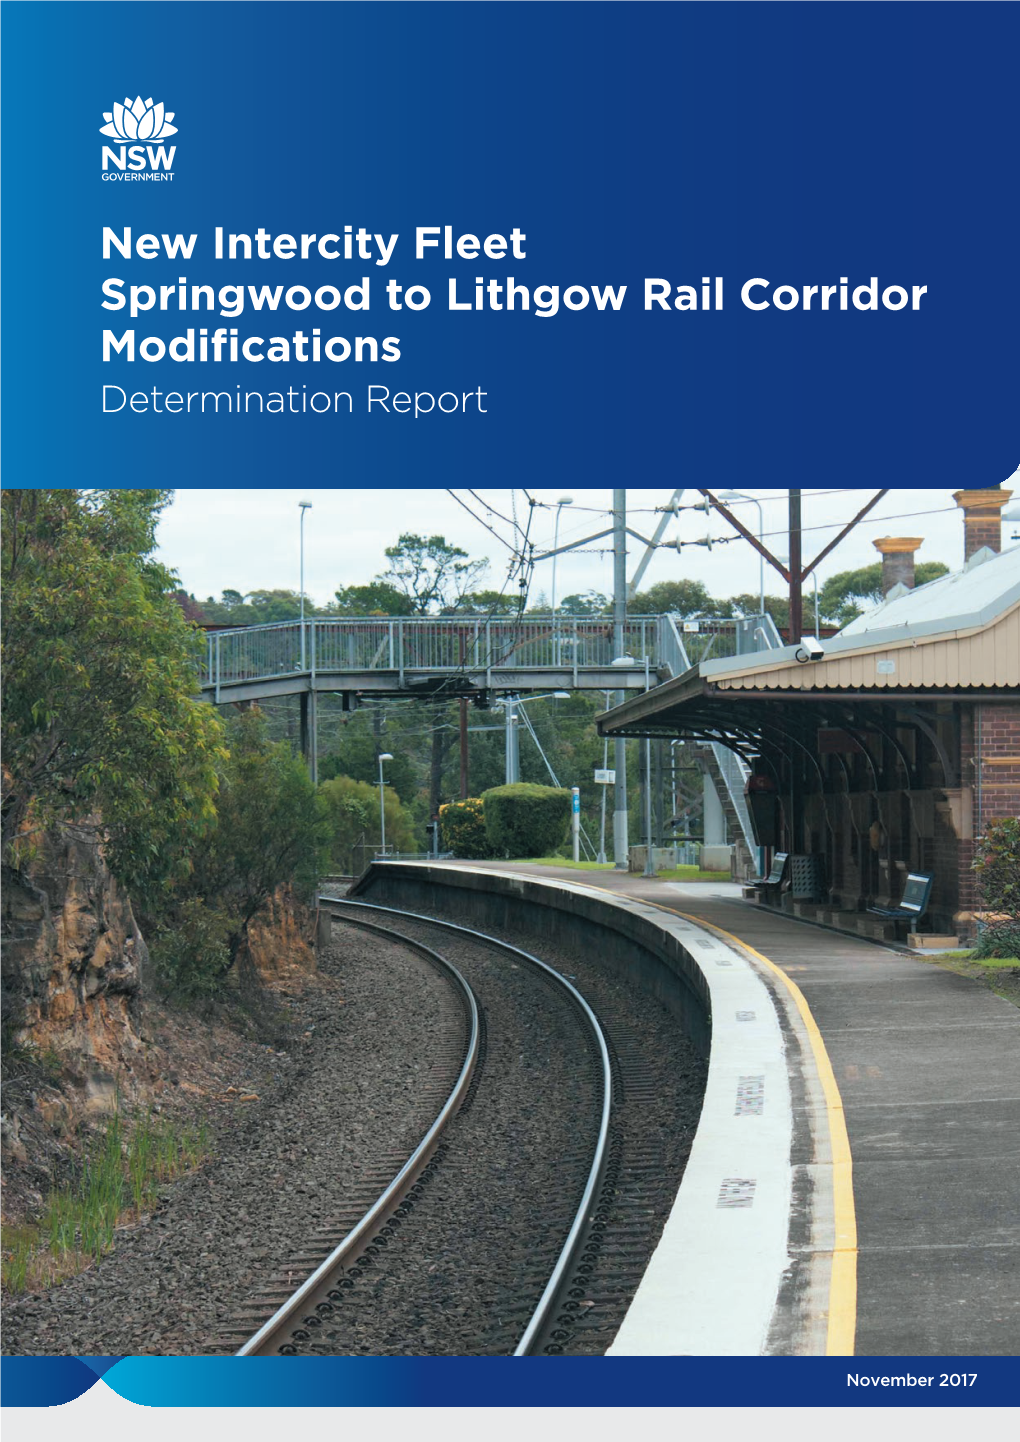 Springwood to Lithgow Rail Corridor Modifcations Determination Report